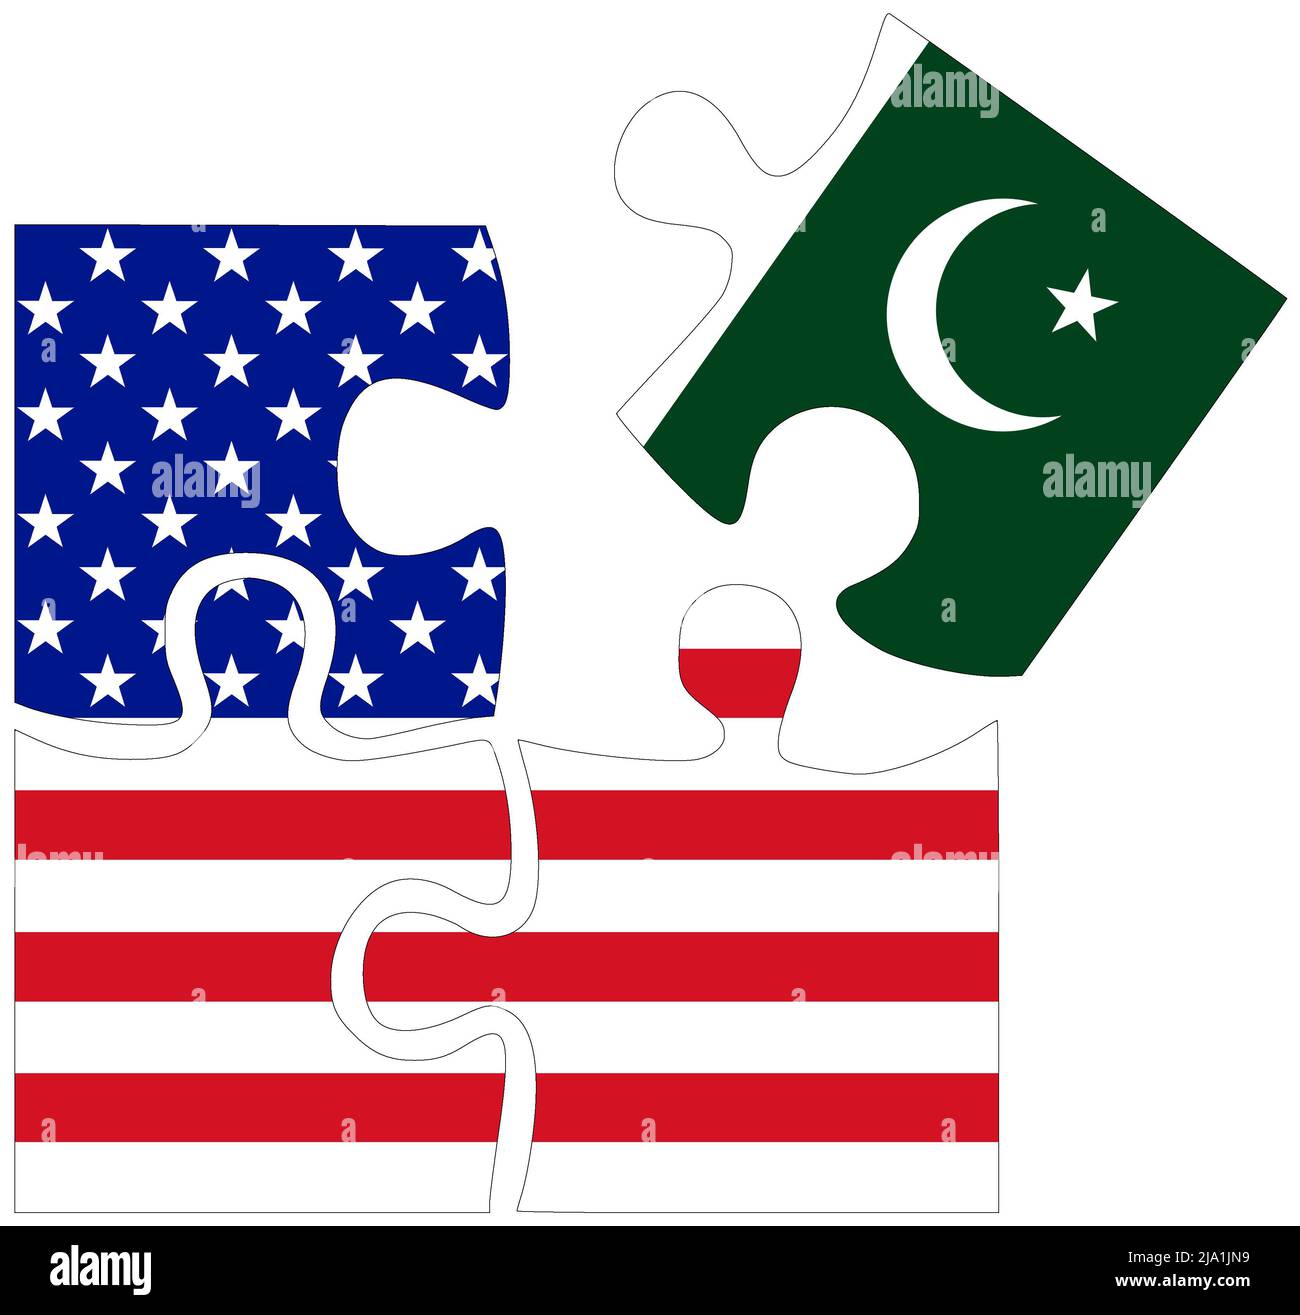 USA - Pakistan : puzzle shapes with flags, symbol of agreement or friendship Stock Photo